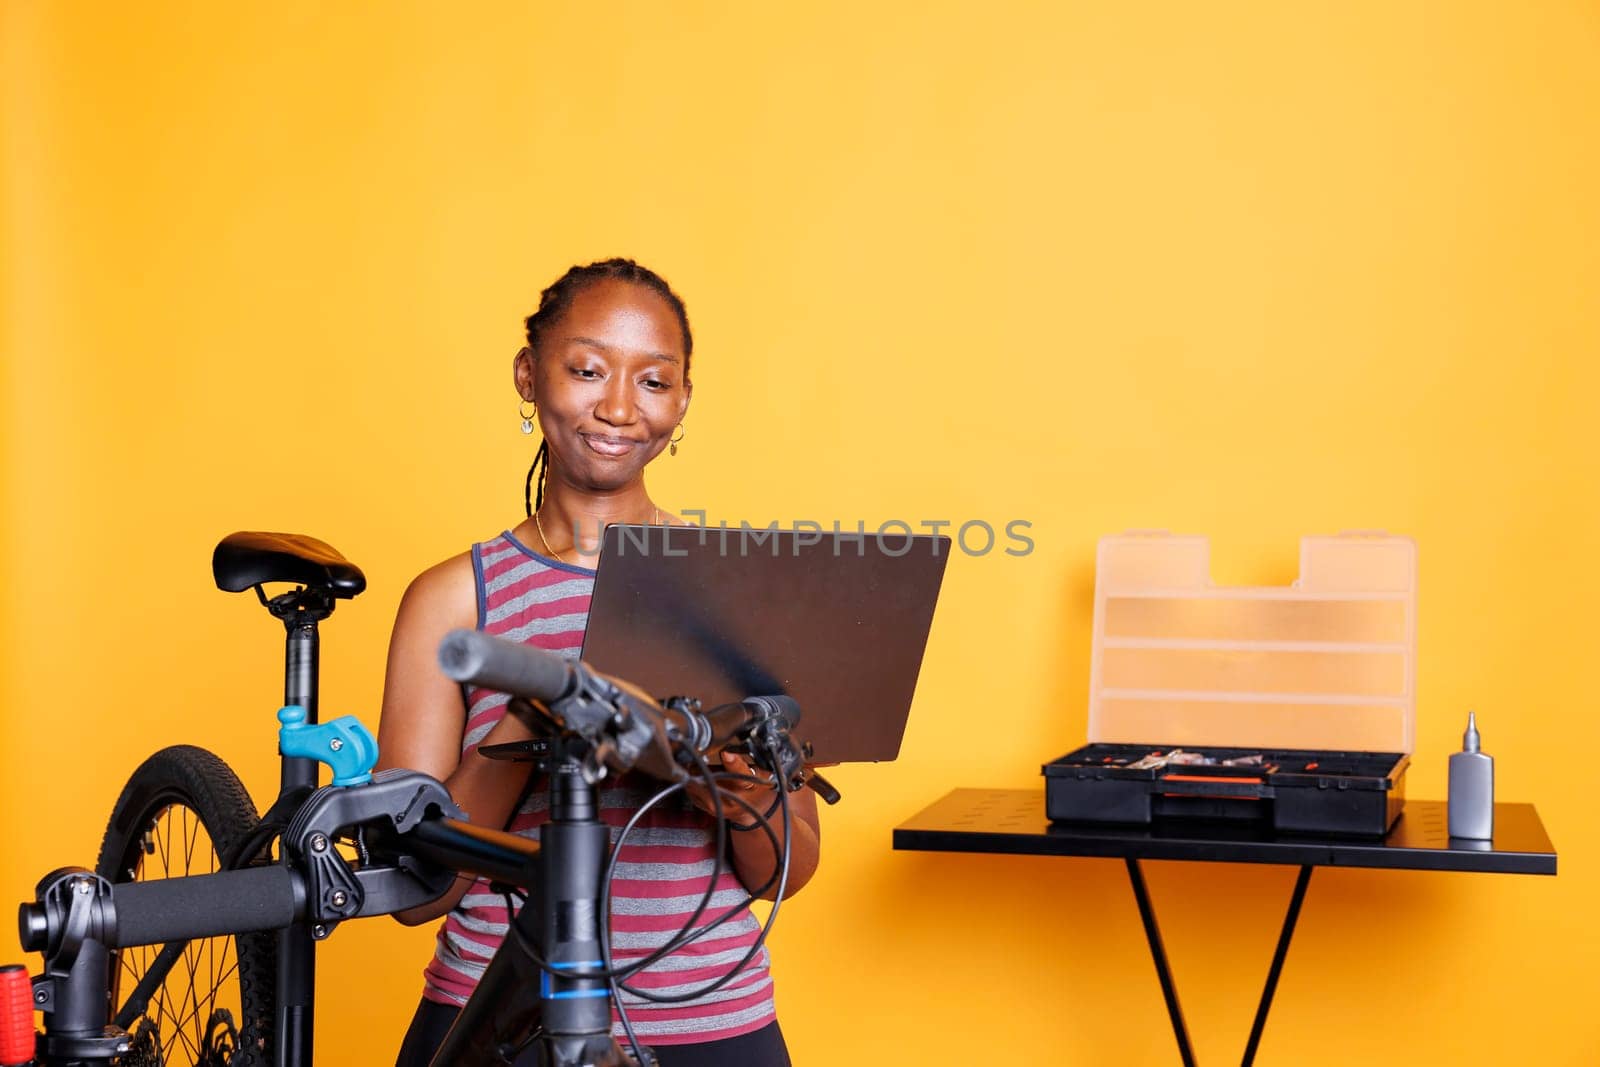 In front of yellow background, black woman performs bike maintenance by utilizing digital laptop for instructions. African american female using minicomputer and professional tools for fixing bicycle.